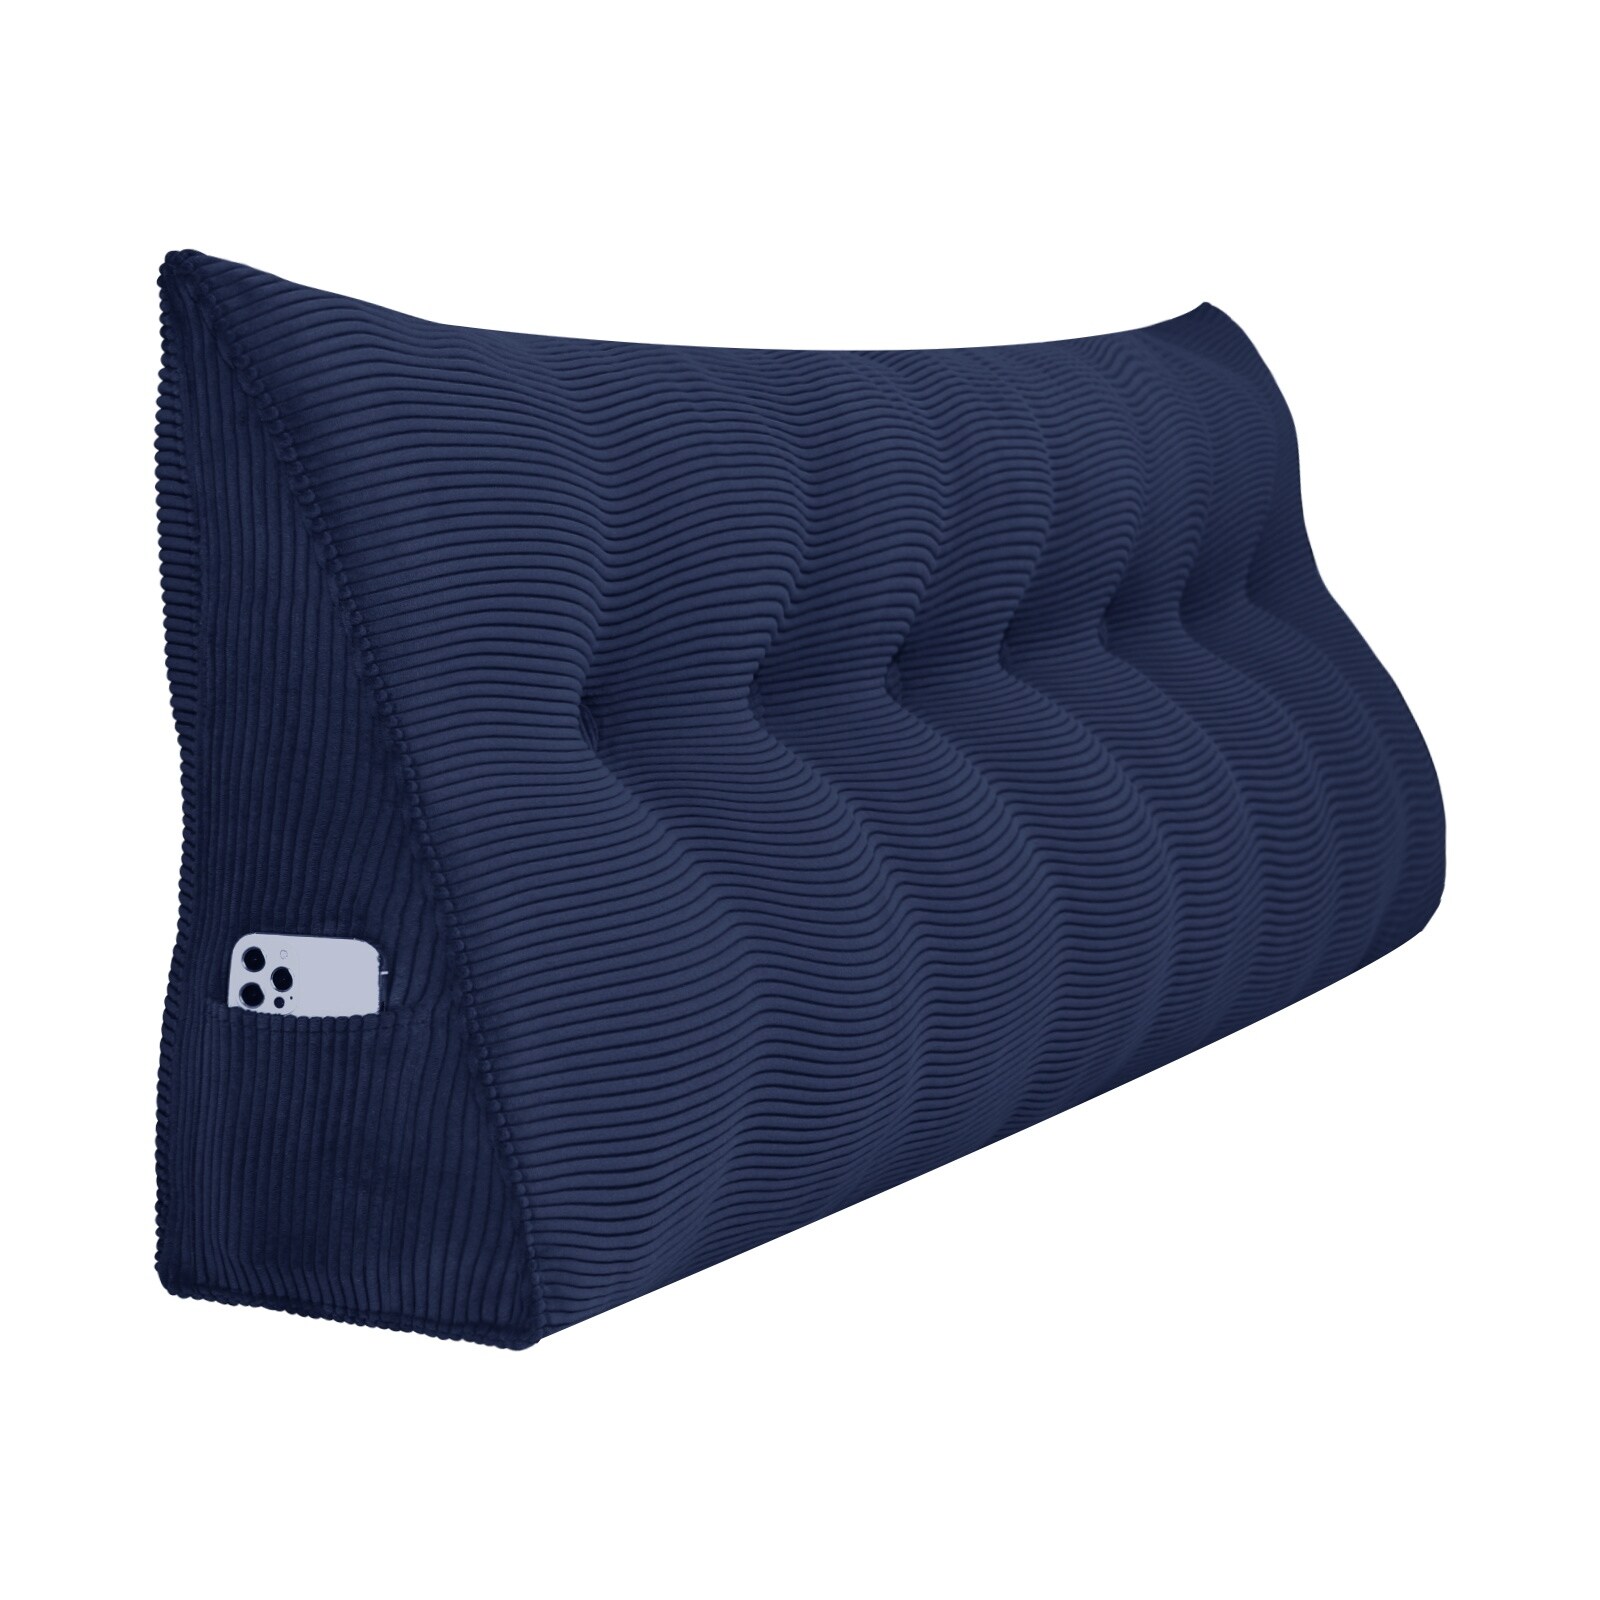 https://ak1.ostkcdn.com/images/products/is/images/direct/7a0fd20179b66d62b596c1cc561c56bd7b1a3c8c/WOWMAX-Bed-Rest-Back-Reading-Wedge-Pillow-Headboard-Daybed-Cushion.jpg